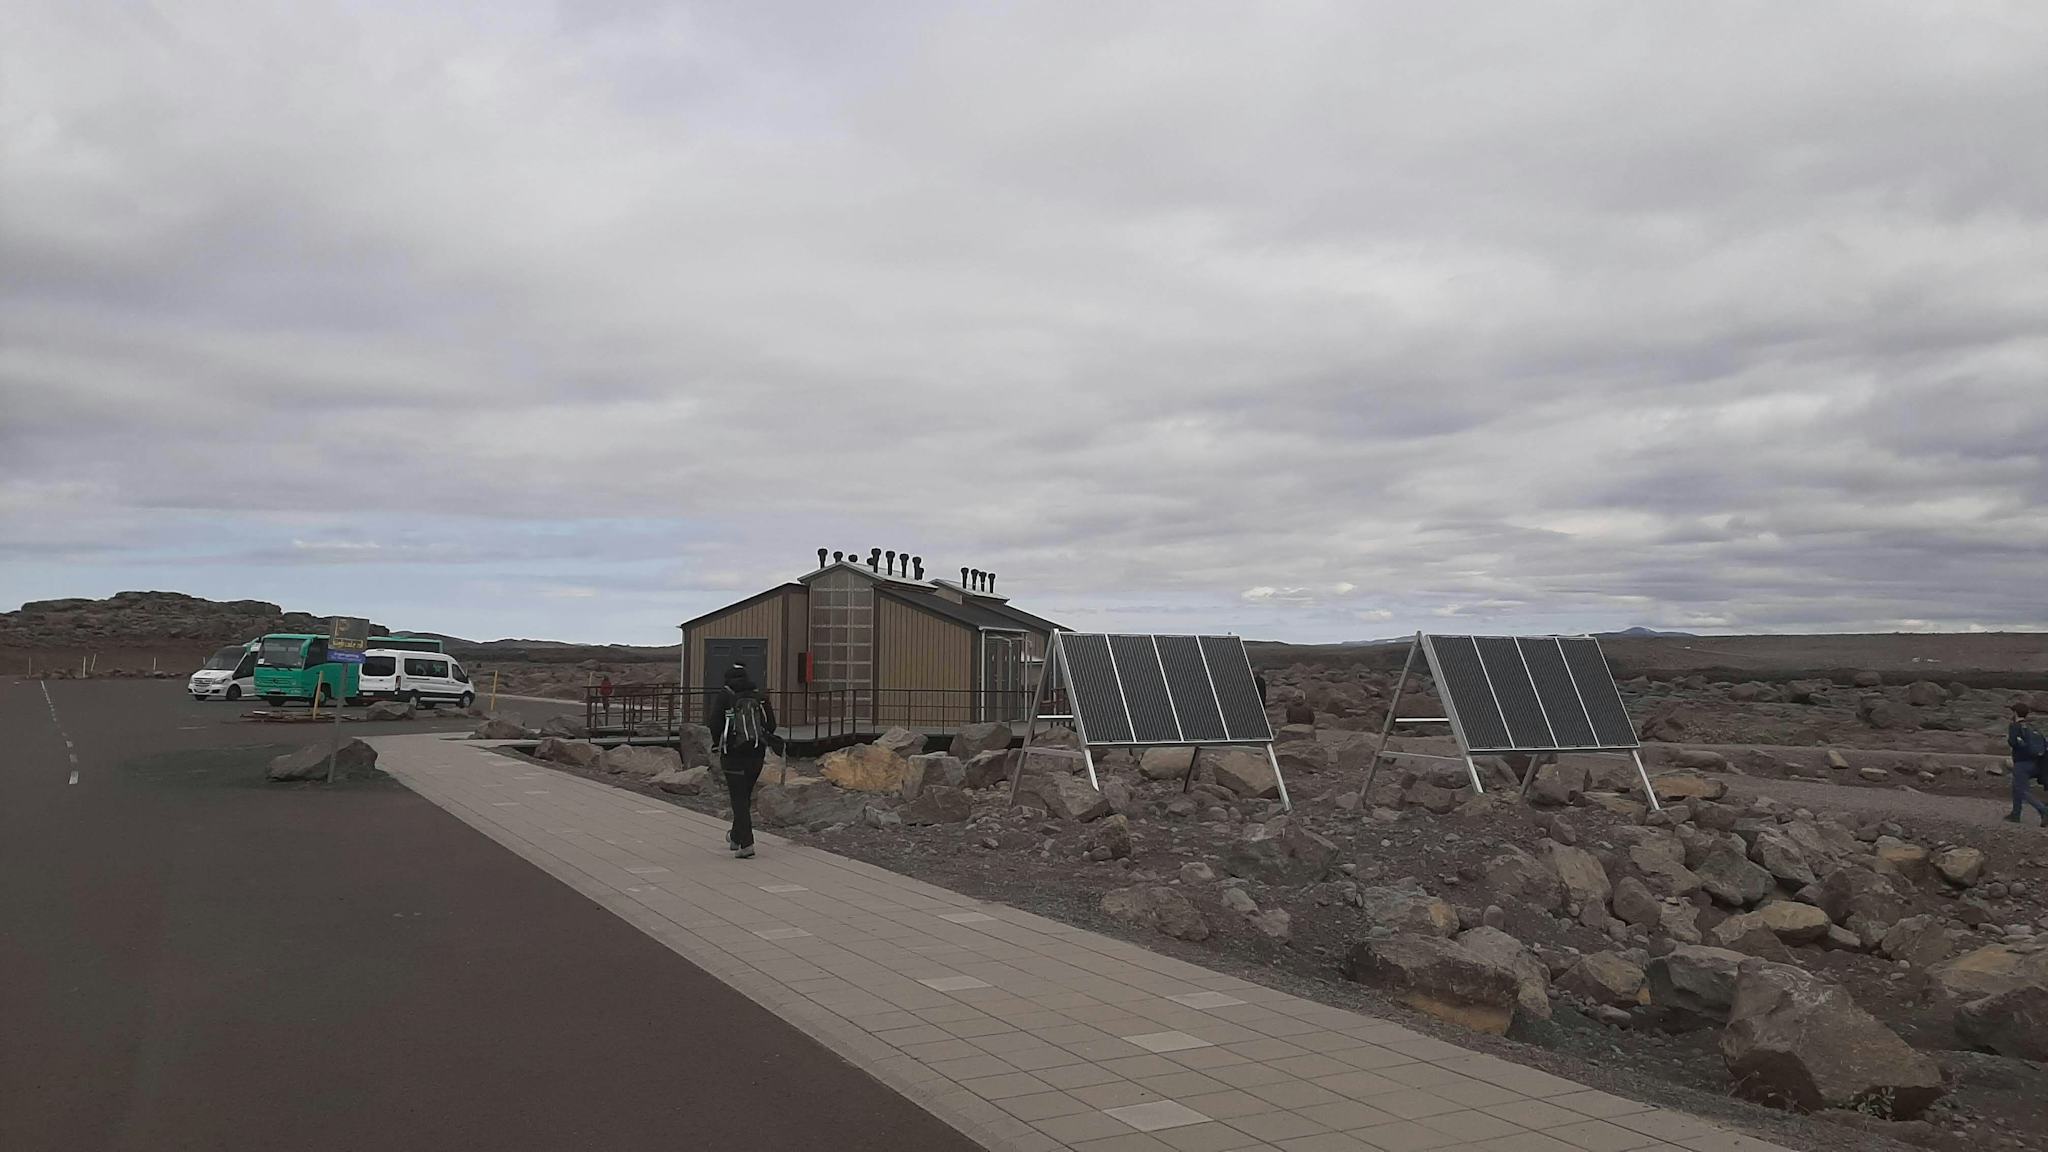 A person walking towards small cabin like structure with dark roof next to two solar cells